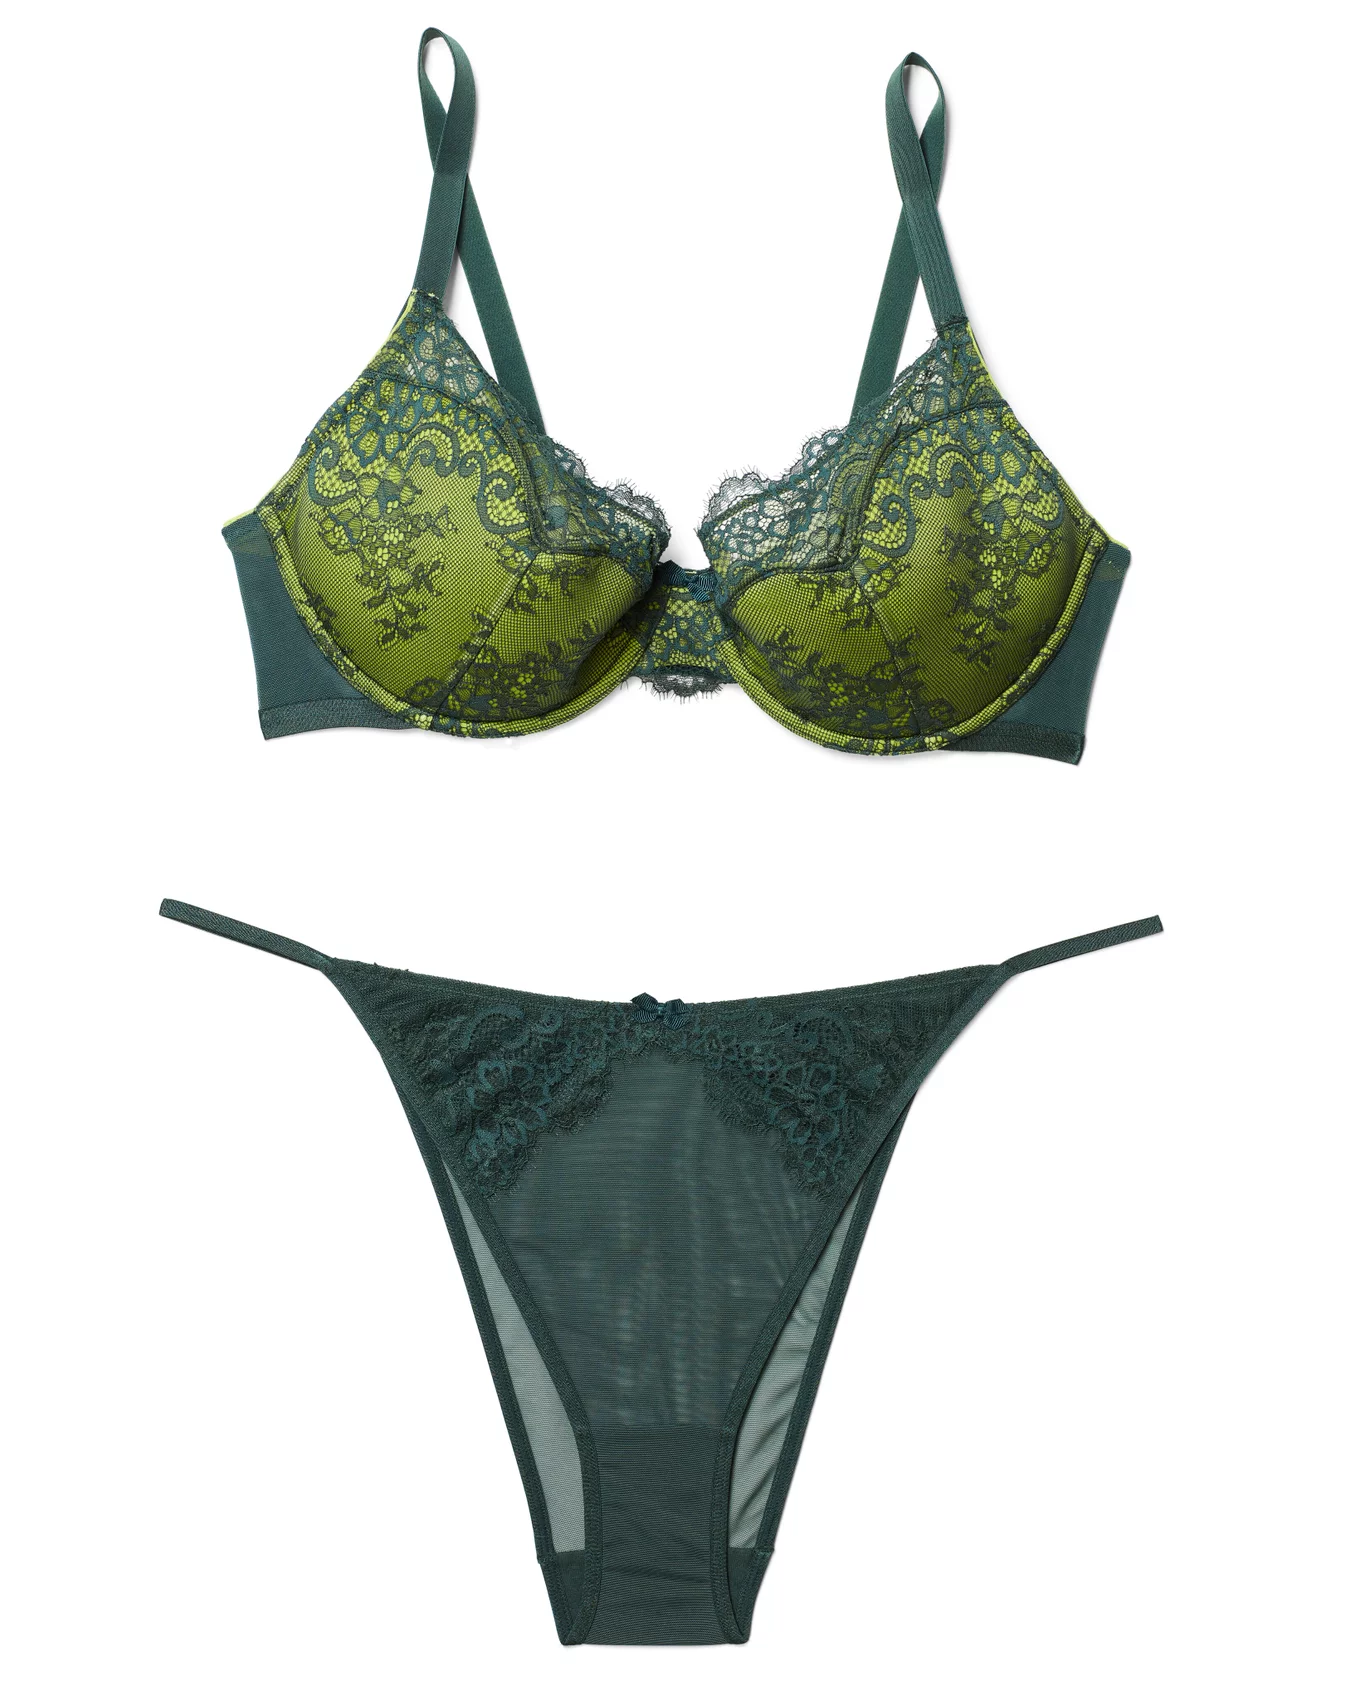 Unlined Lace Bra Gift for Her See Through Black & Green Bralette